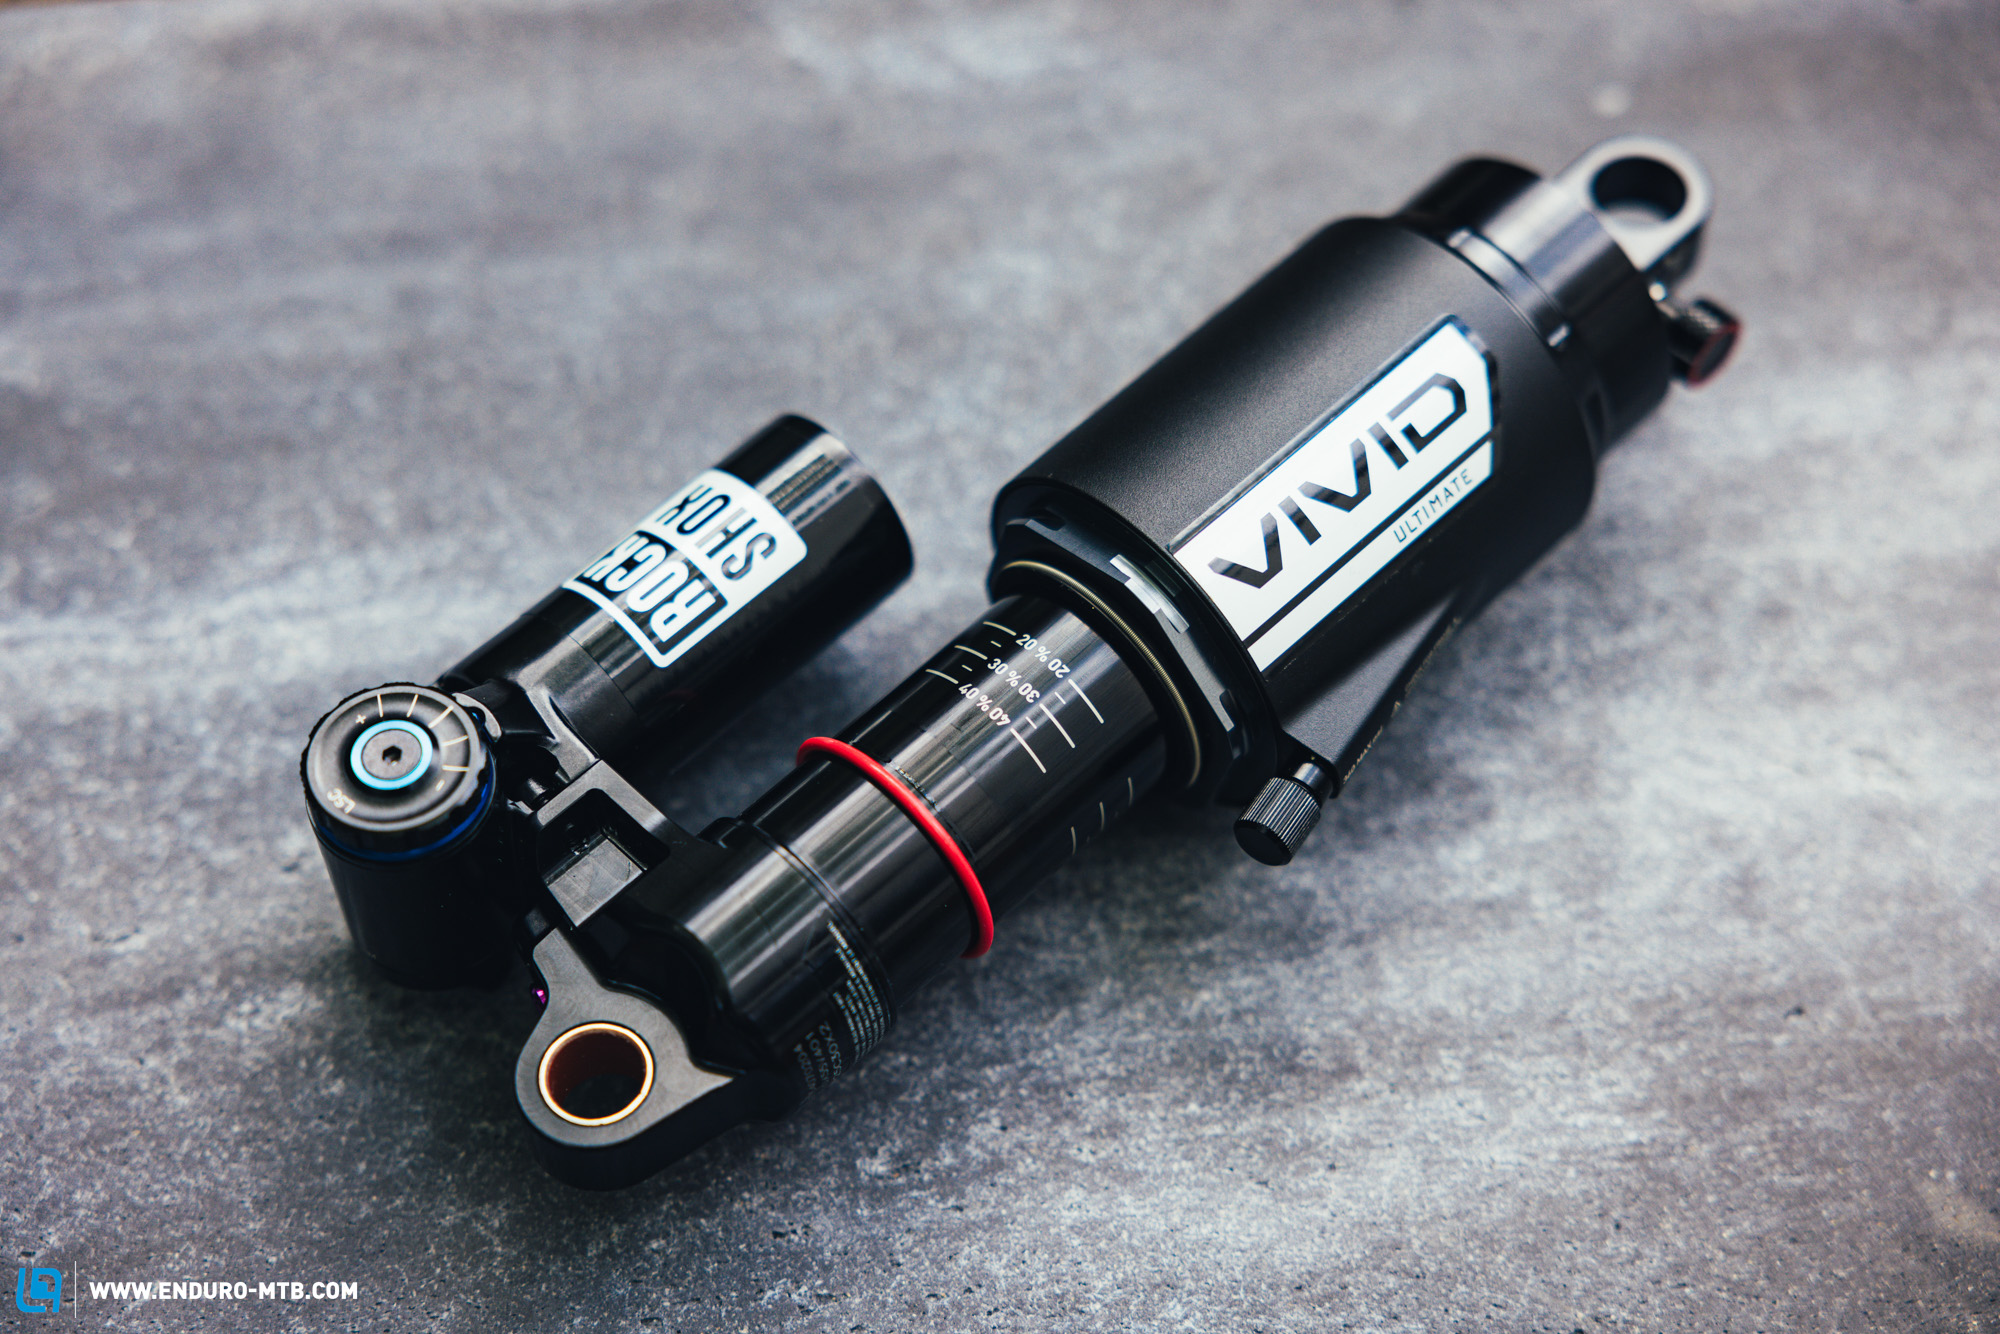 First ride review of the 2023 RockShox Vivid air shock – The resurrection